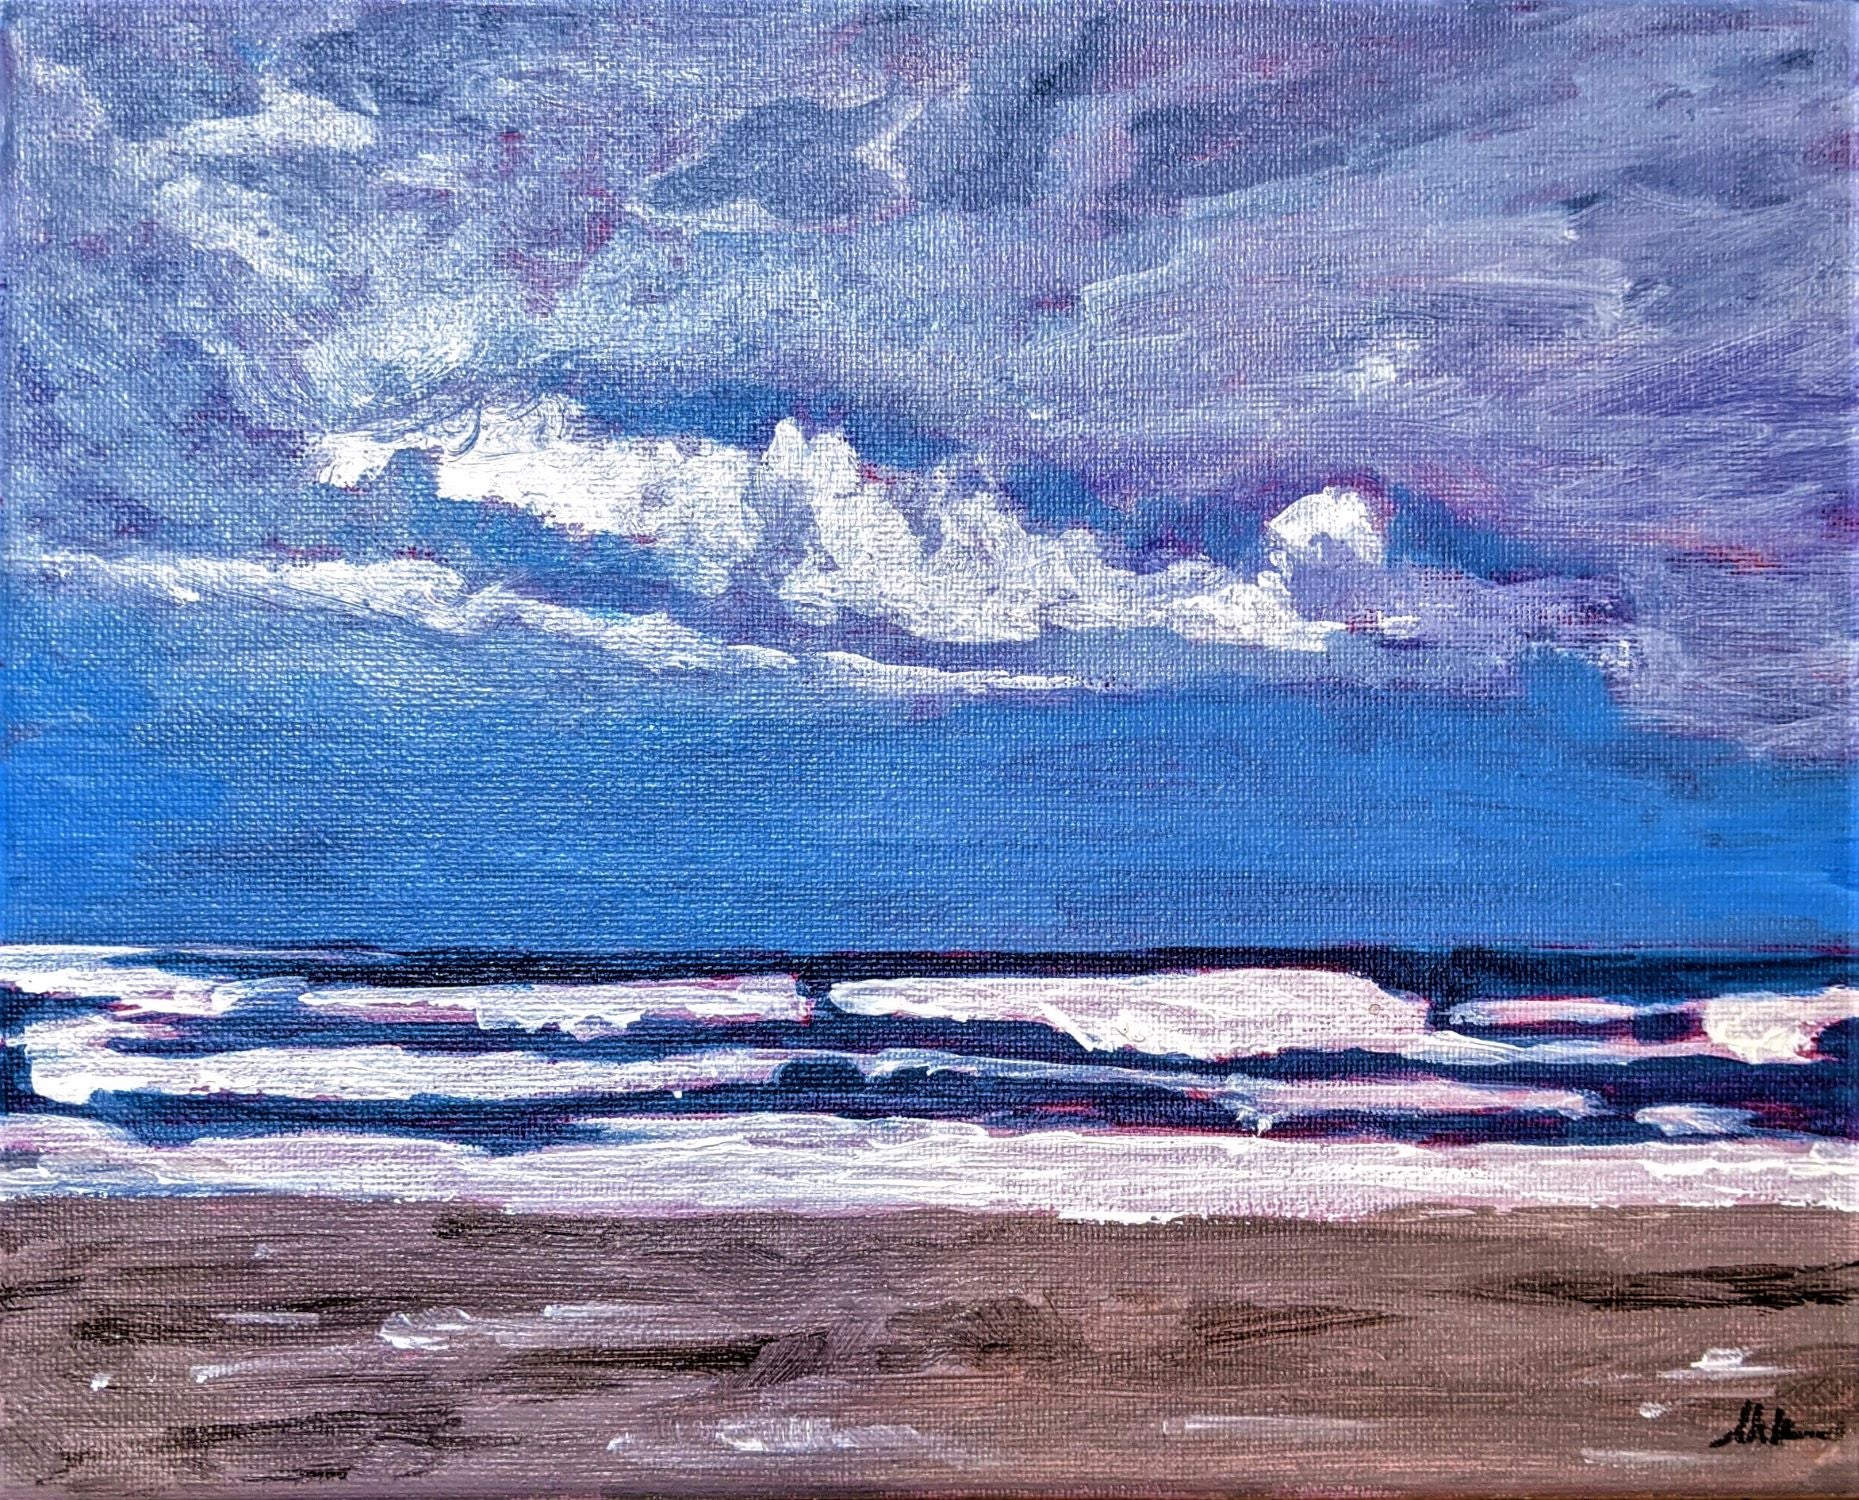 Stormy Sea acrylic painting on canvas